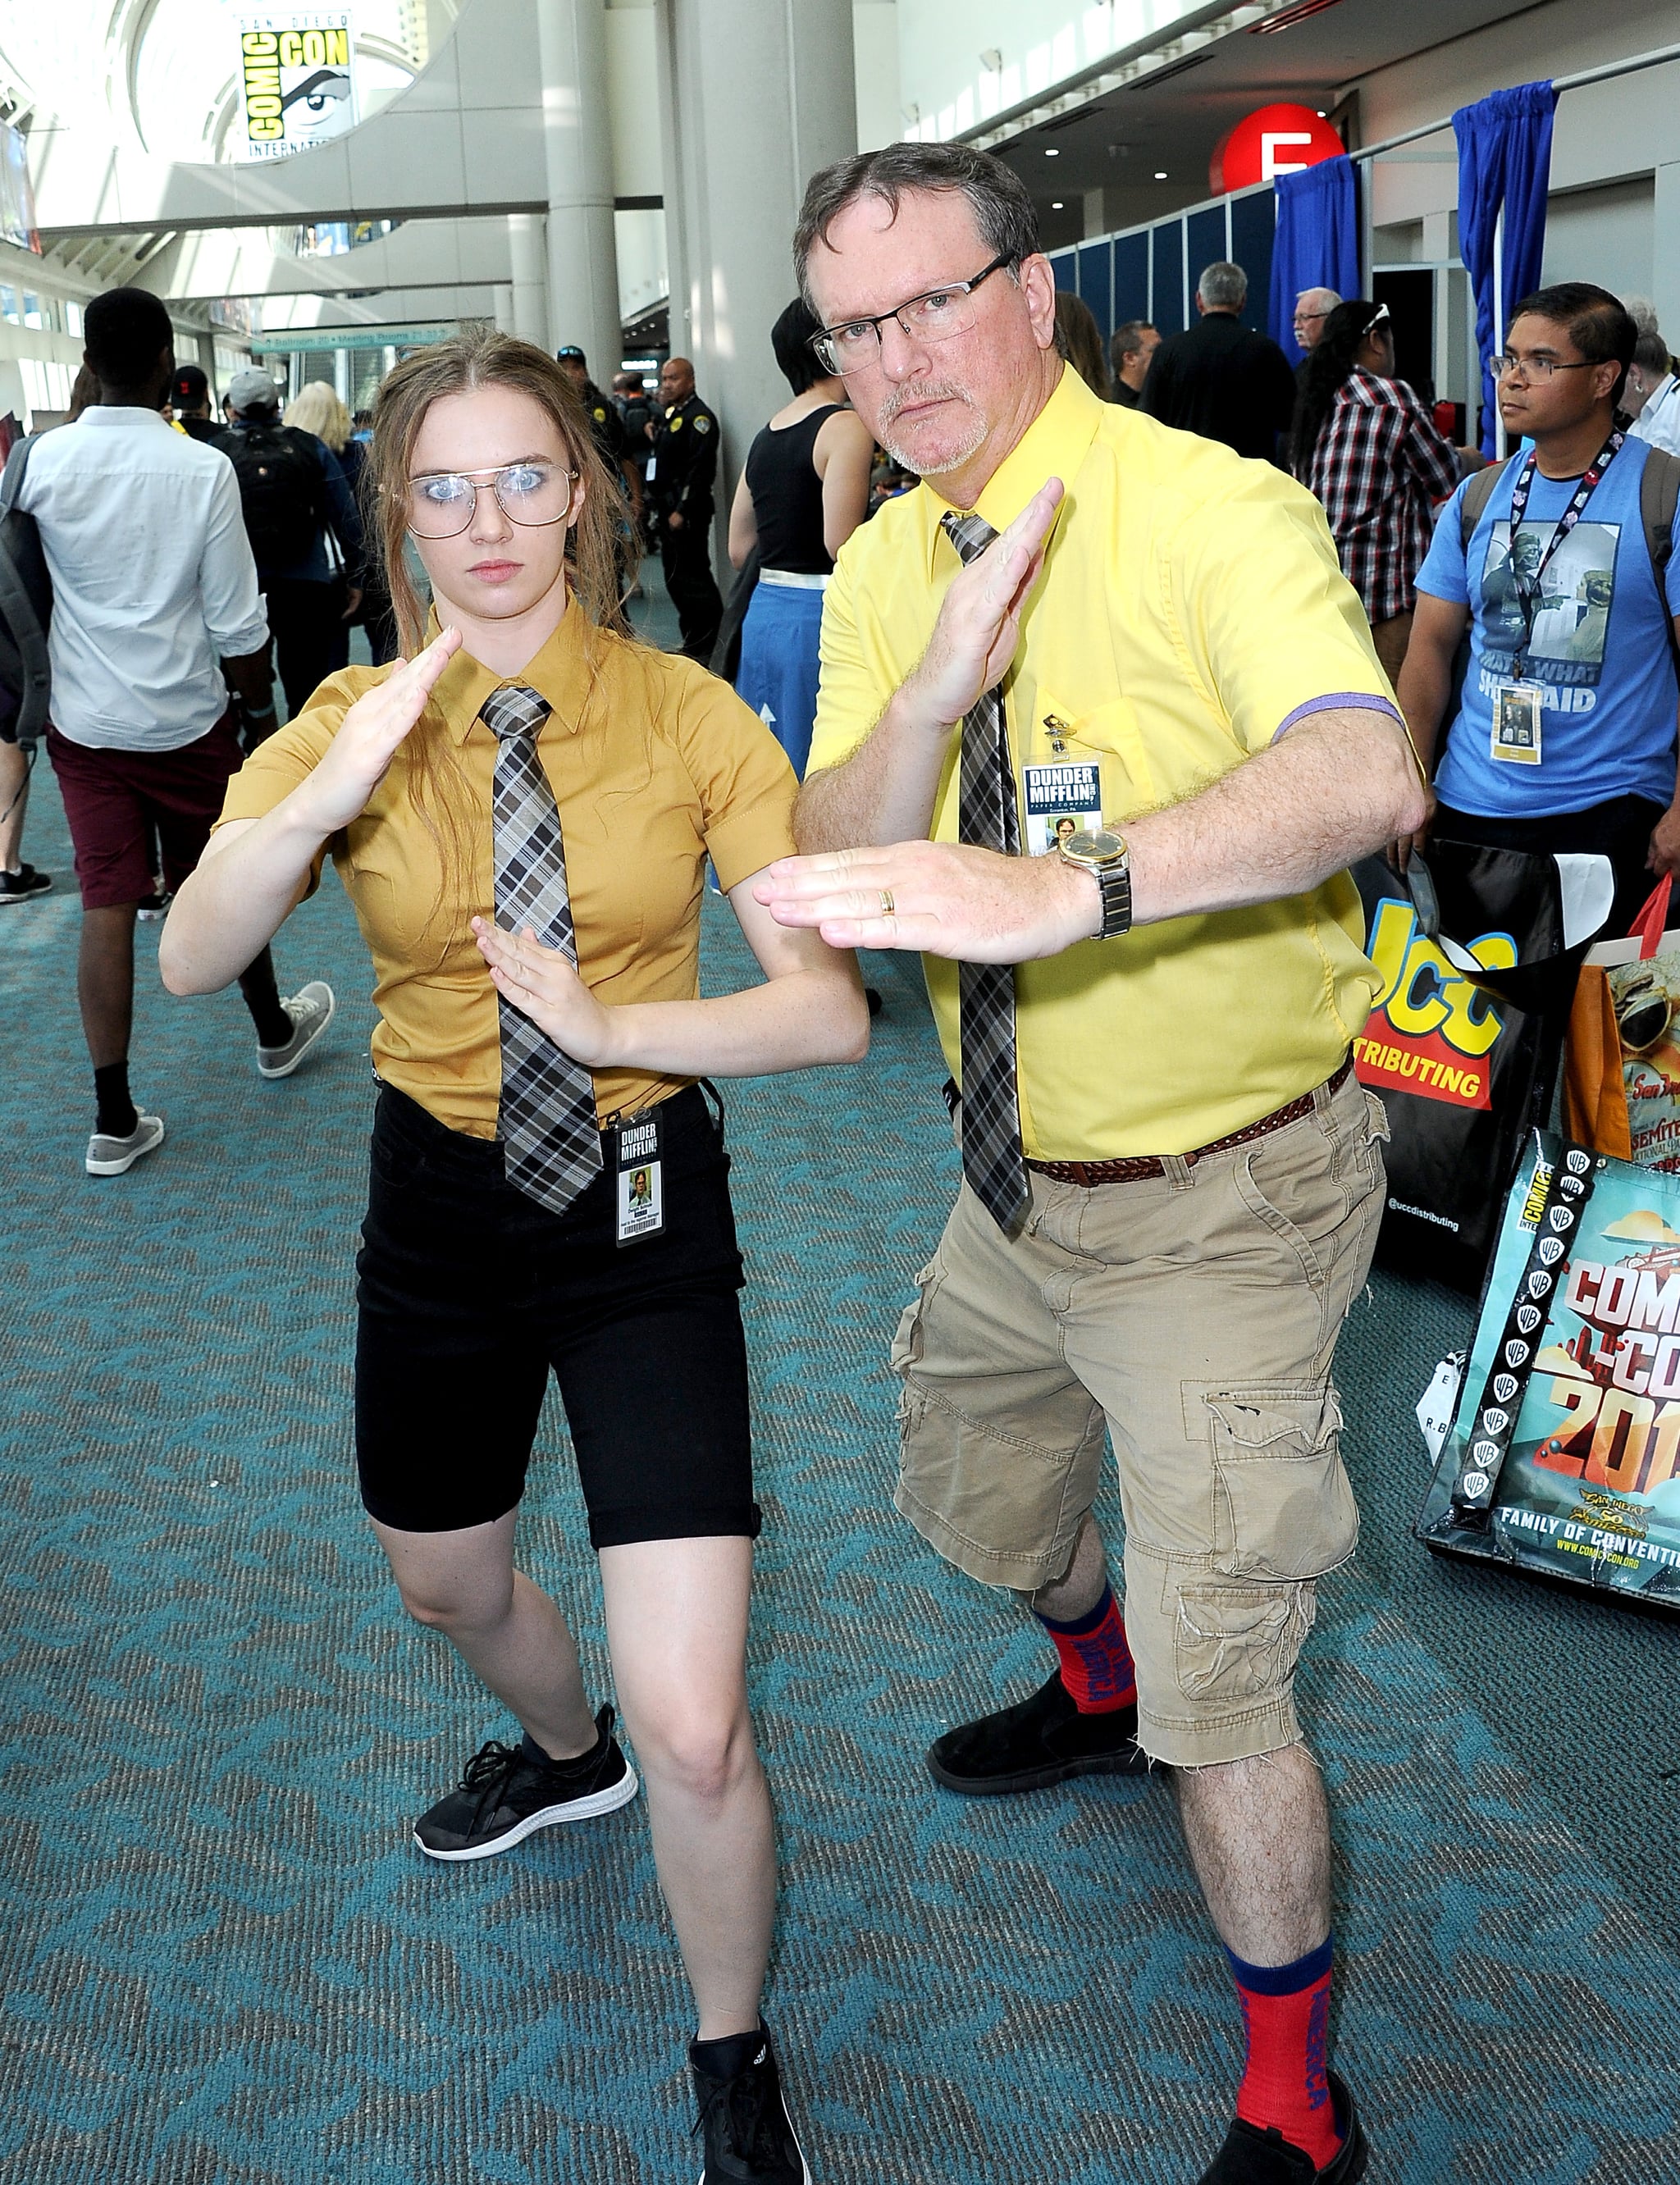 Dwight Schrute From The Office | 140+ Photos of the Most Creative Cosplays  From San Diego Comic-Con 2019 | POPSUGAR Entertainment Photo 11